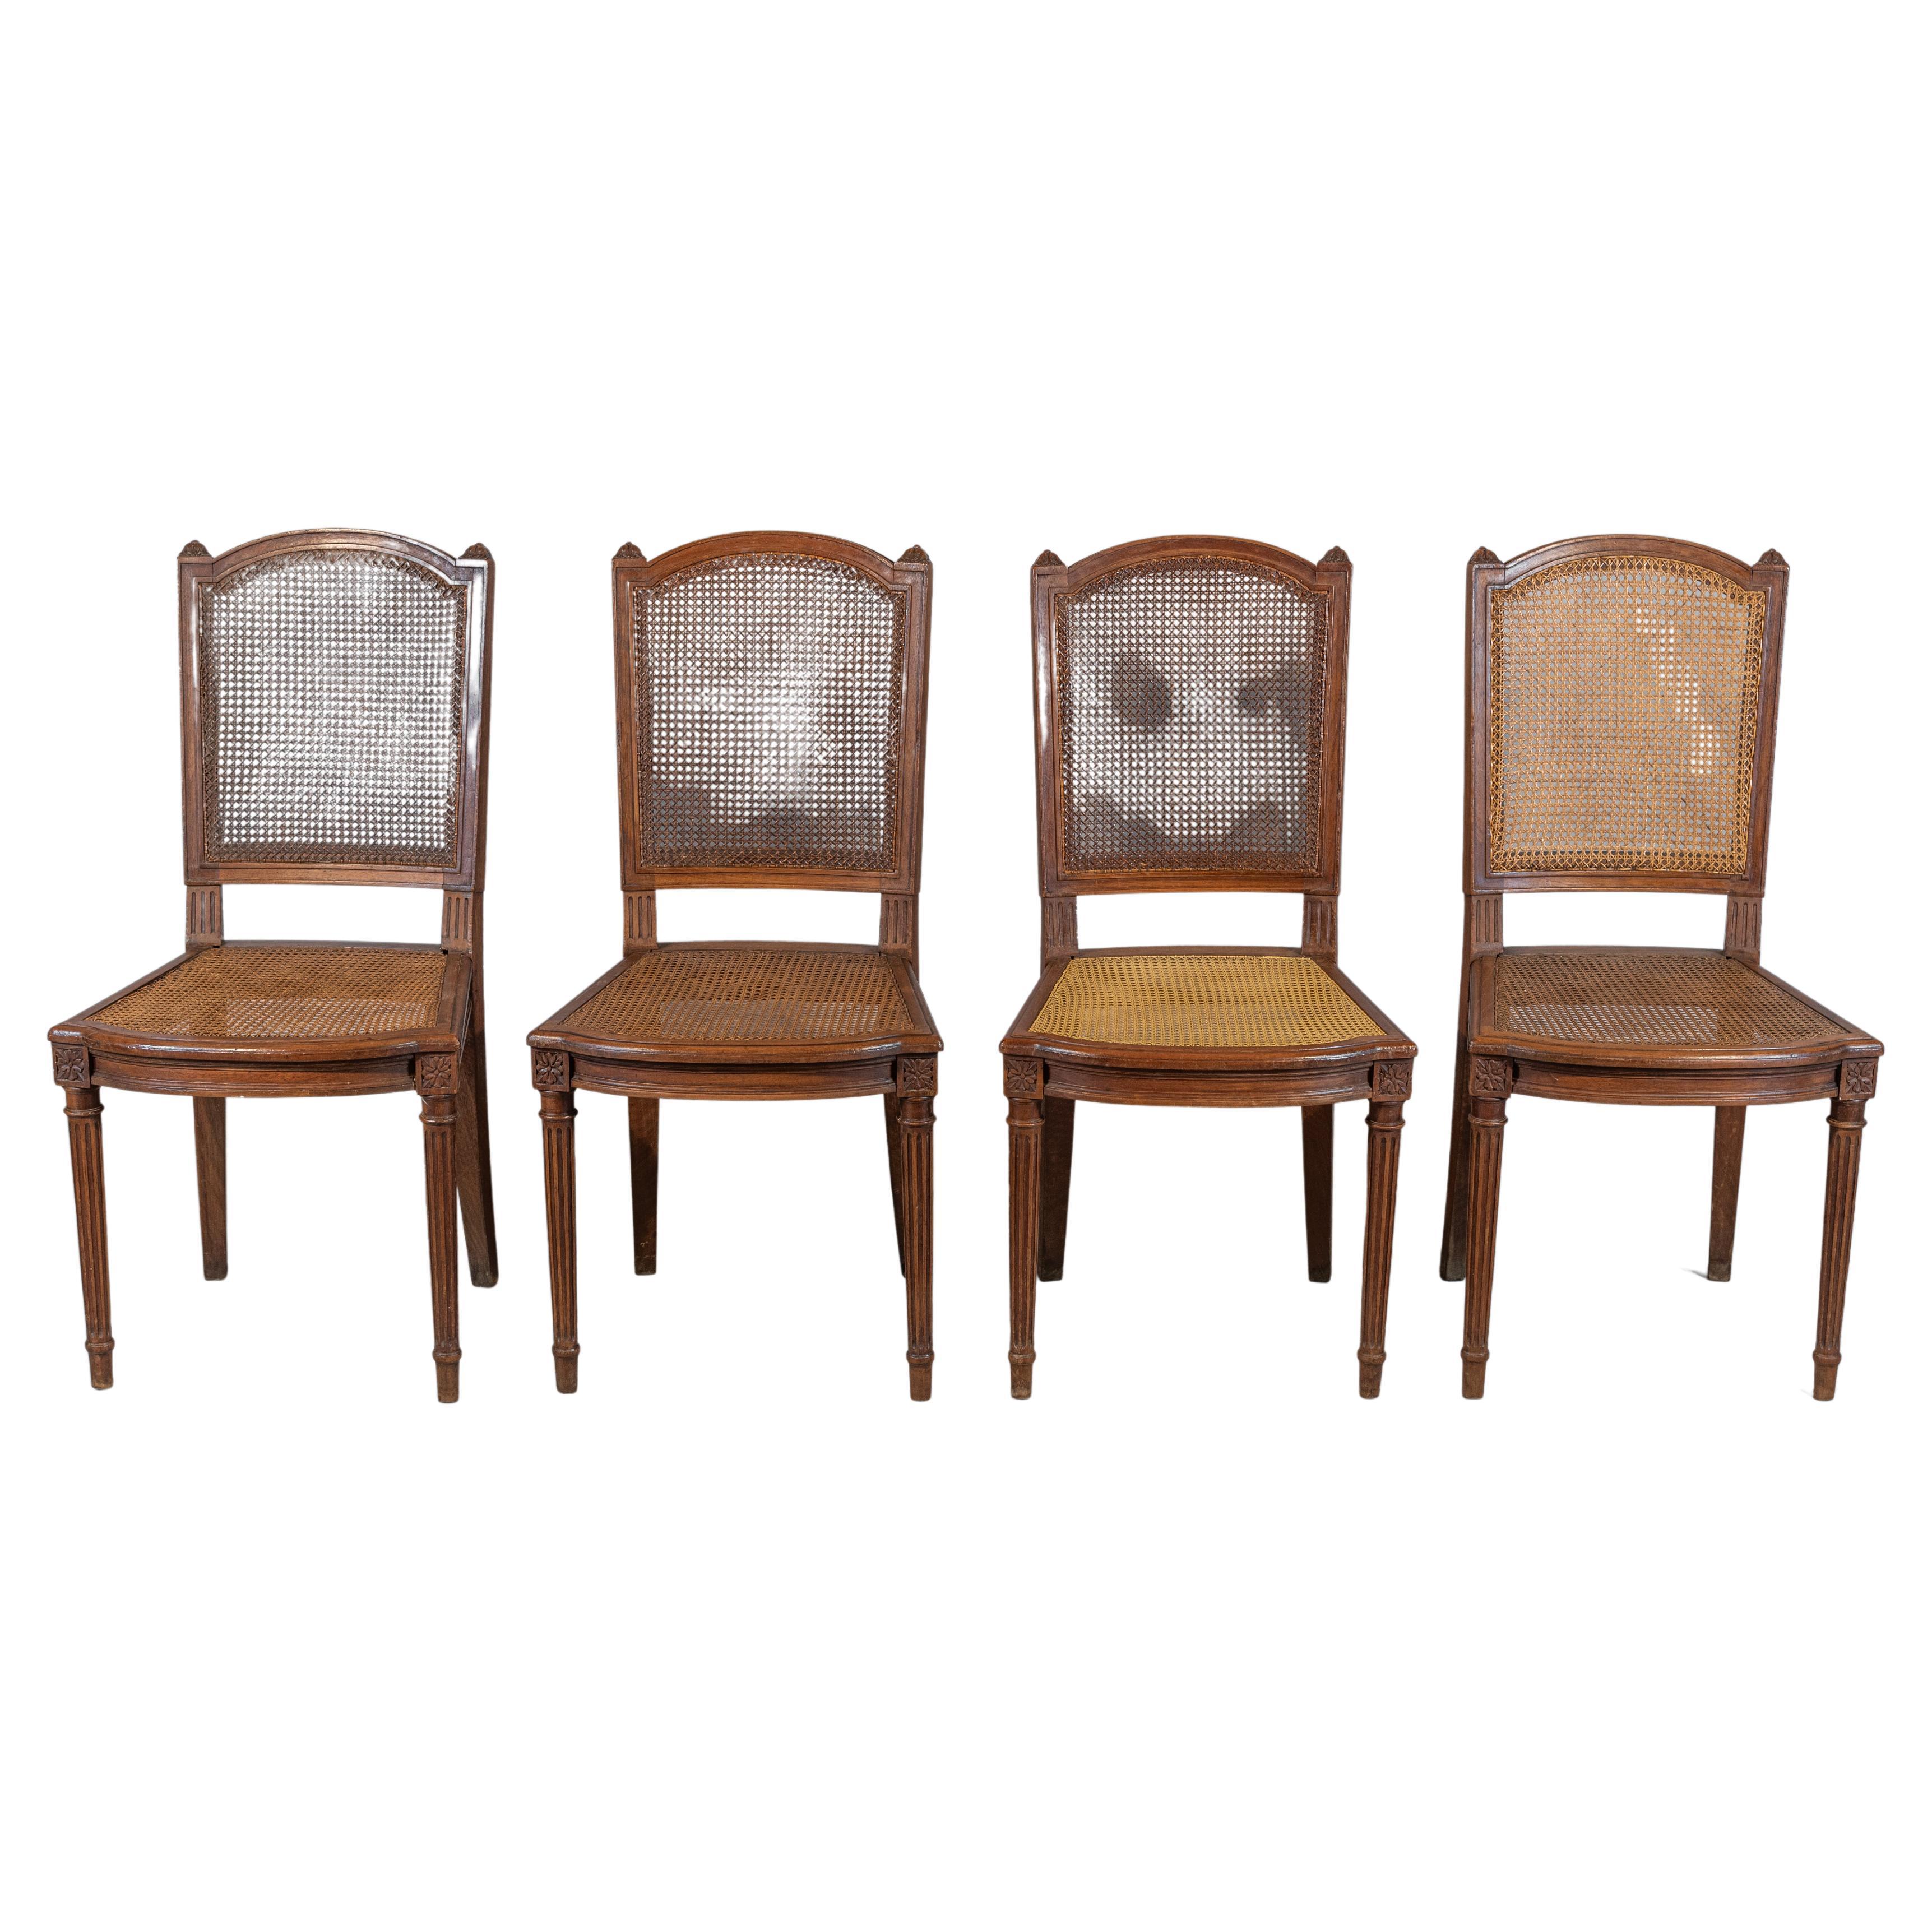 19th Century Set of 4 French Louis XVI Style Chairs